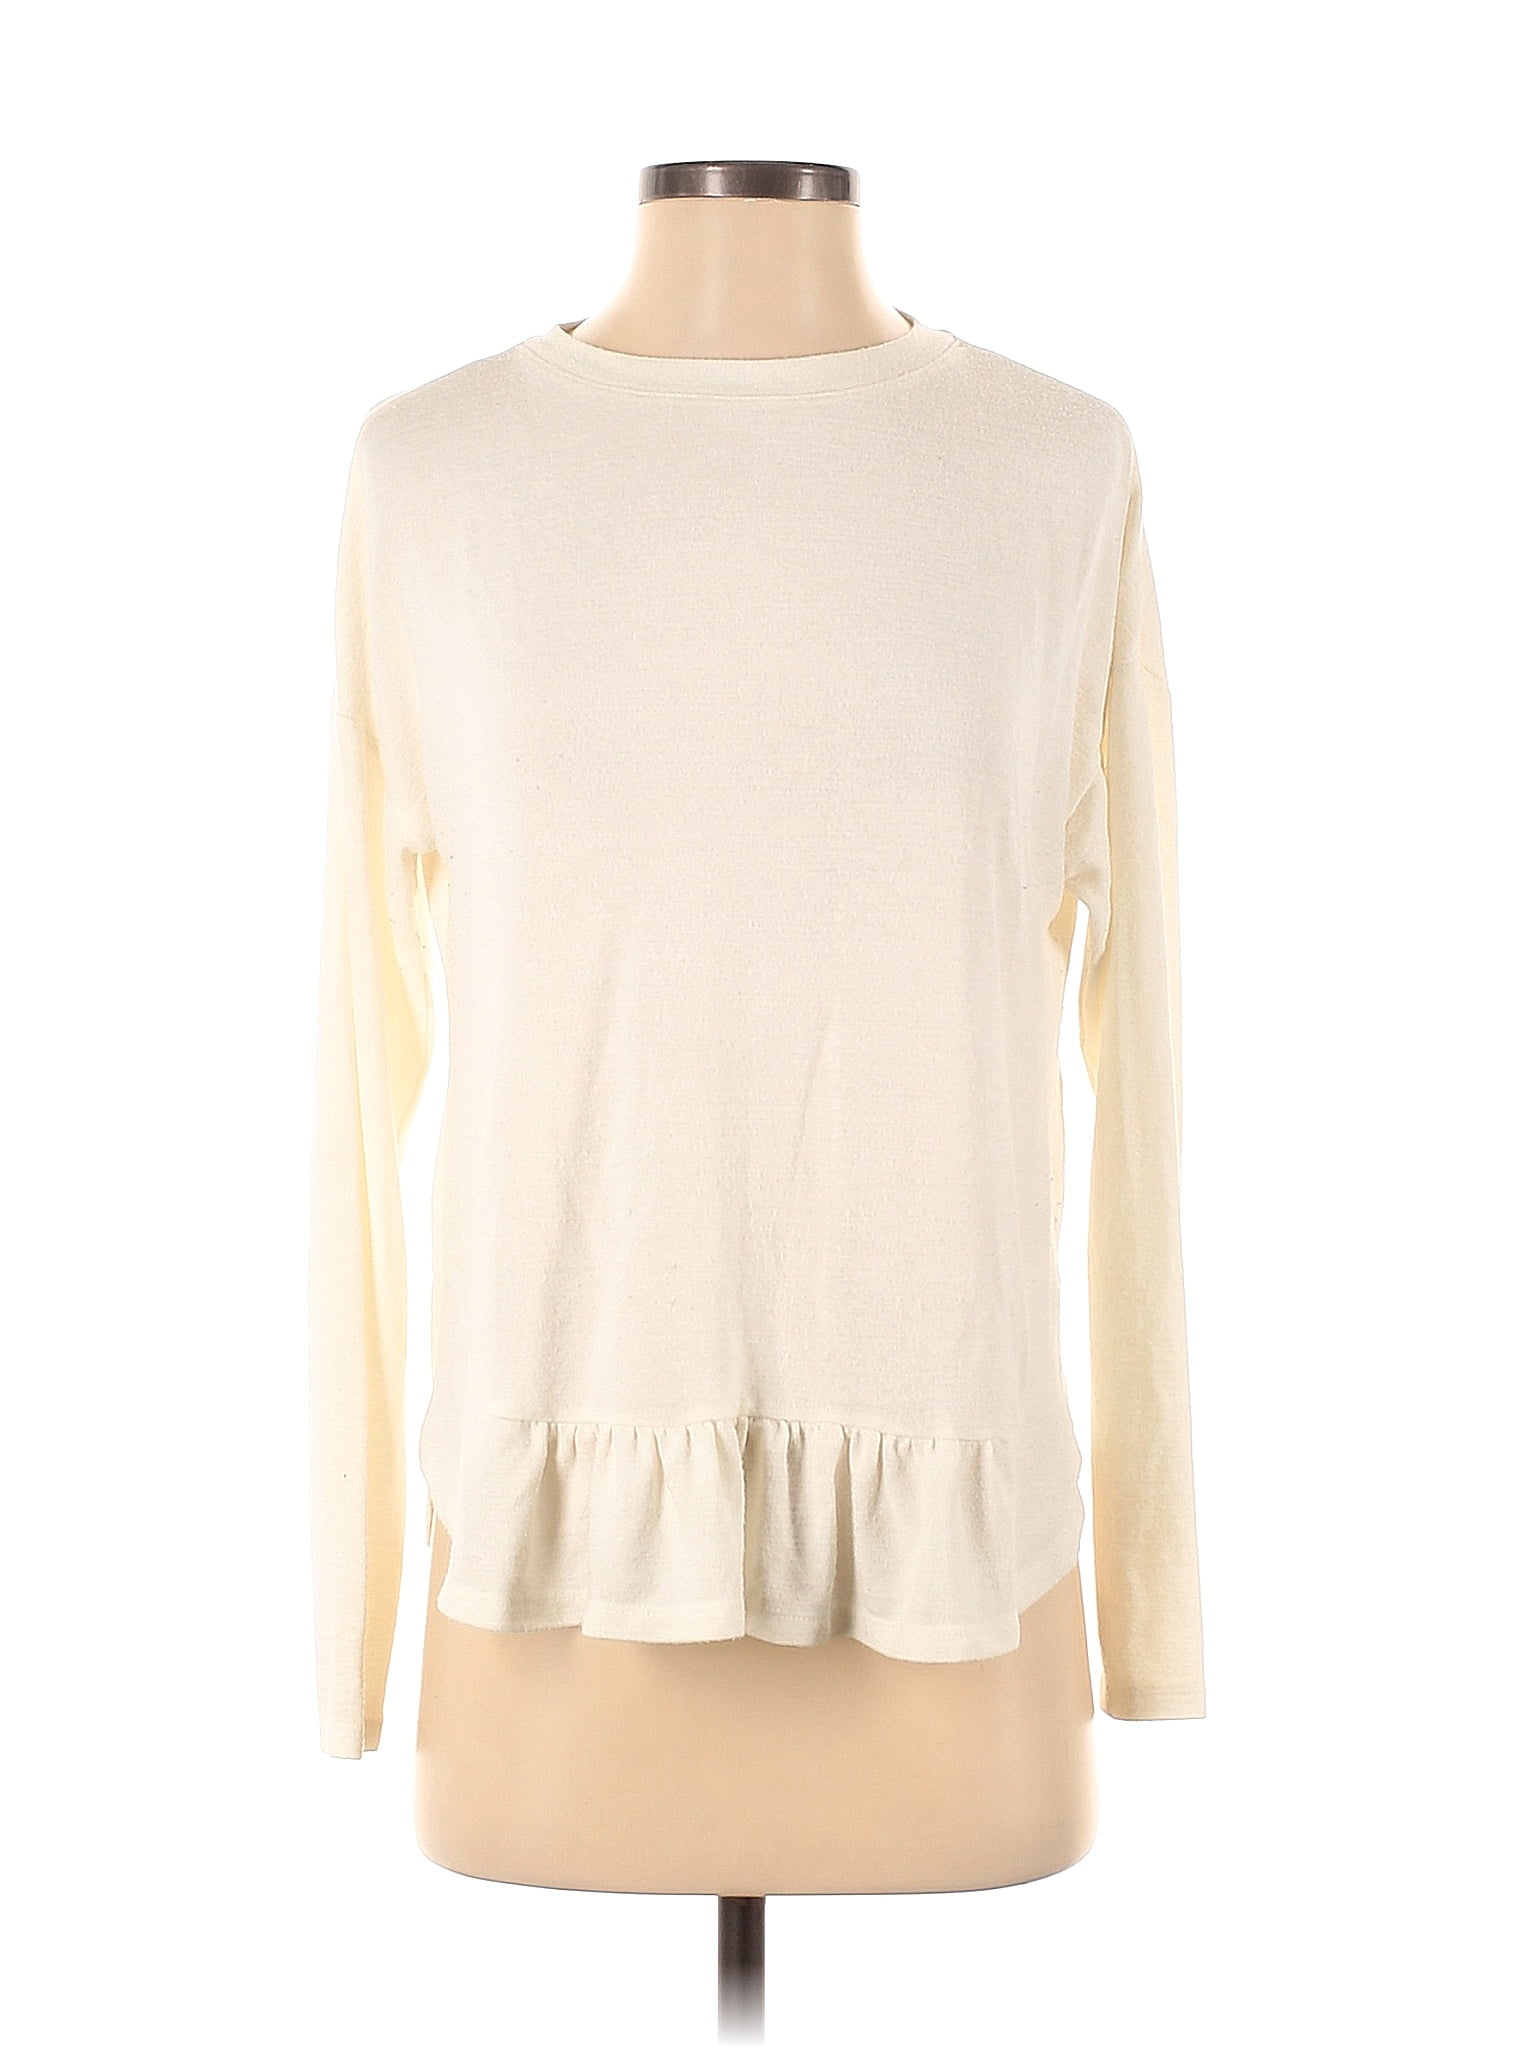 Banana Republic Factory Store Ivory Pullover Sweater Size S - 69% off ...